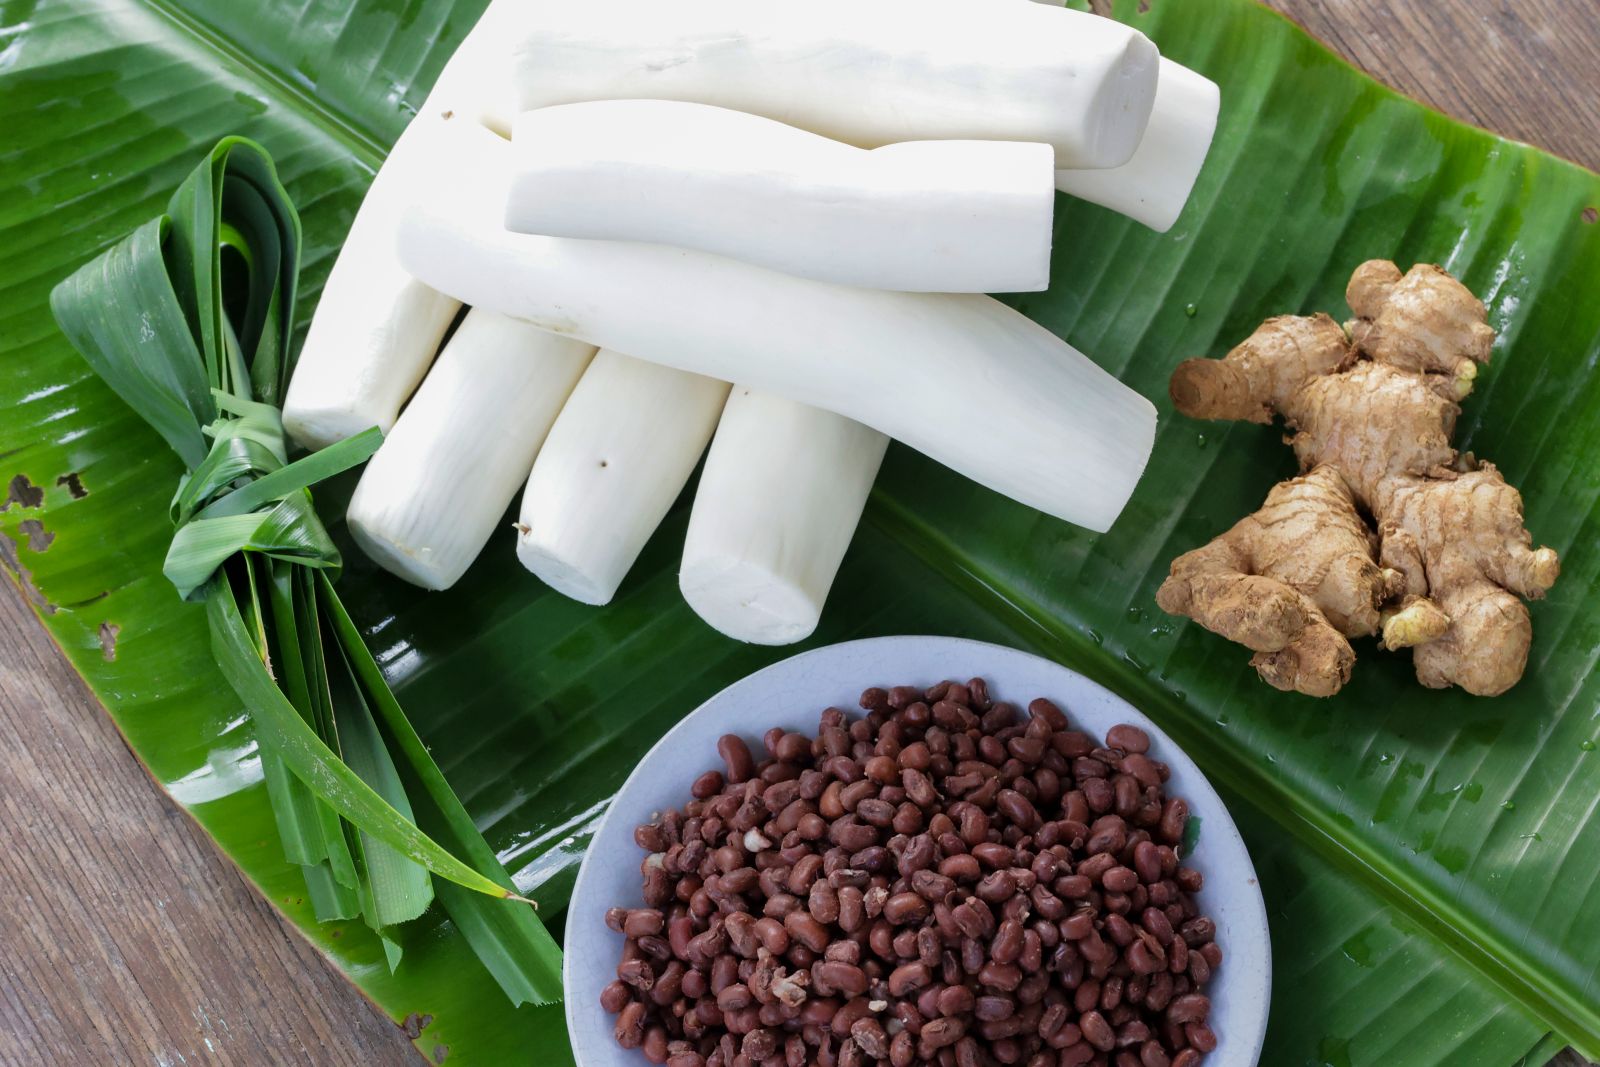 The ingredients to make cassava cakes are first of all fresh cassava roots, the fillings consist of red beans combined with sugar and ginger; the Pandan leaves to make the cakes aromatic when being steamed, and banana leaves to wrap the cakes